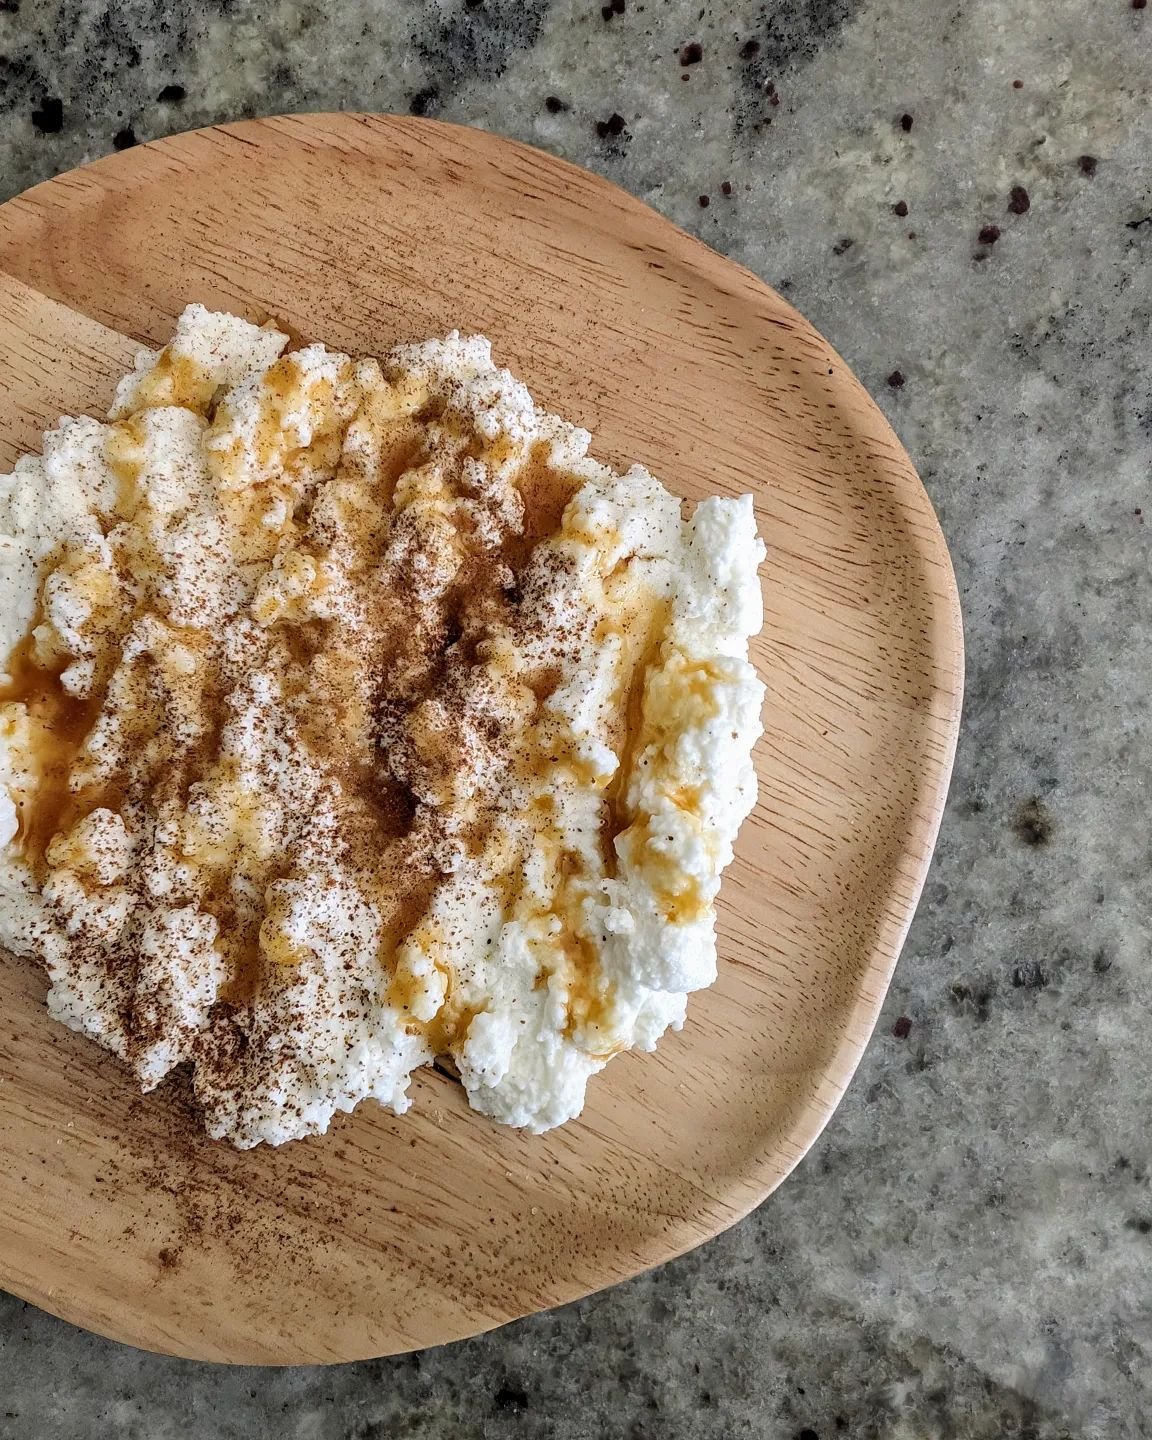 Breakfast, Sicilian style! Home made ricotta, raw local honey, and a touch of cinnamon.